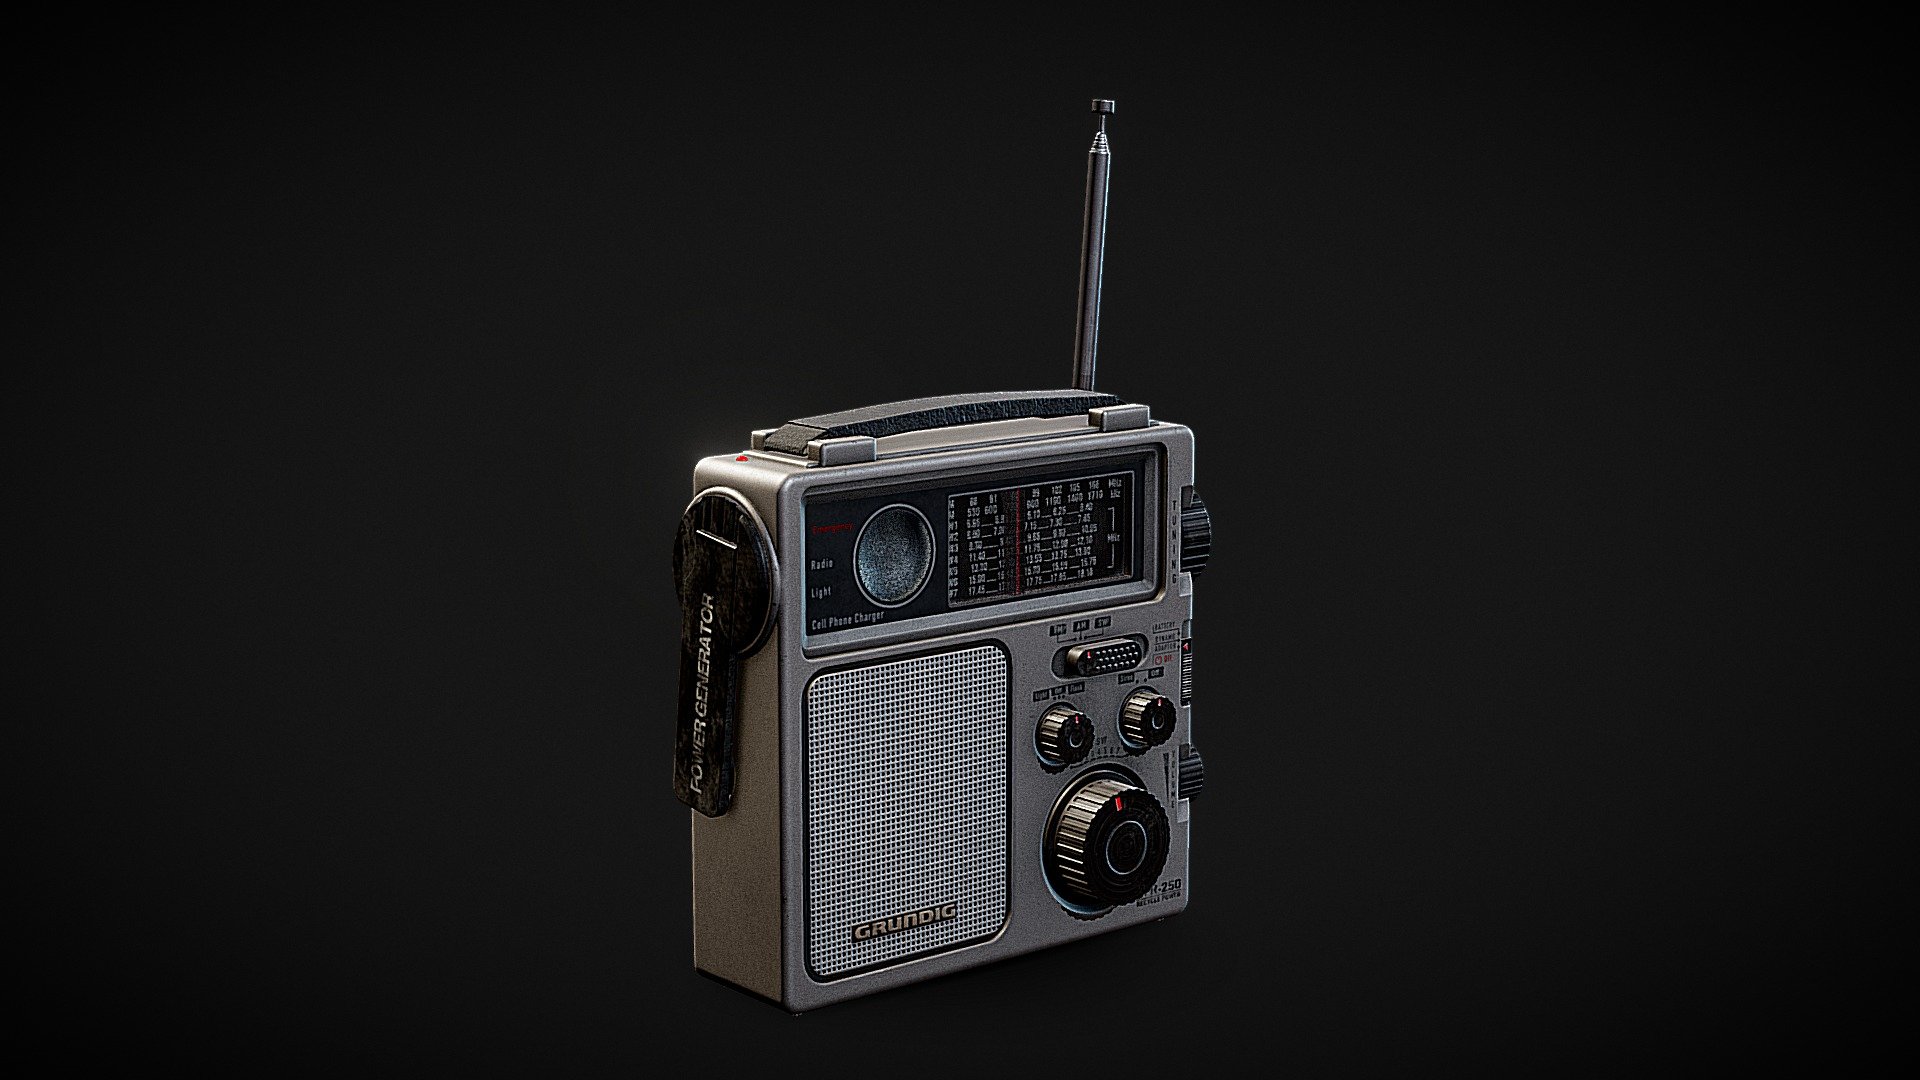 Grundig Radio Model FR-250
A little story about this asset: A long time ago, I had the desire to create an AAA asset for gaming and real-time engines, but I couldn't decide on something that would be useful and significant for myself. Then, a couple of months ago, I watched the movie &ldquo;A Man Called Otto,